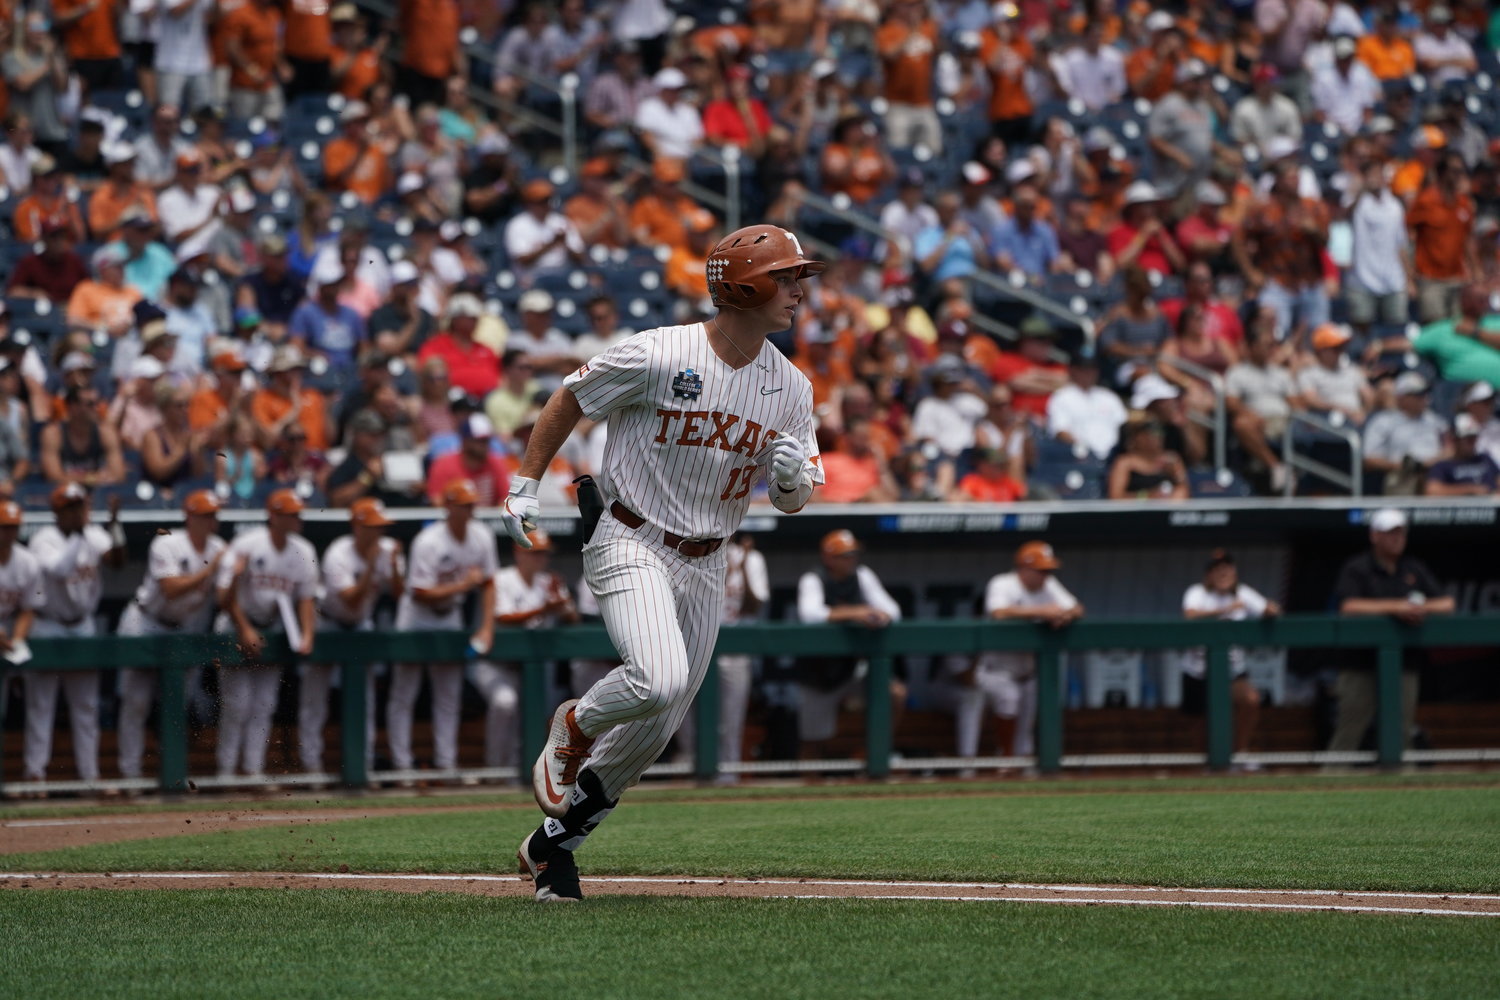 Mitchell Daly and Texas beat Tennessee 8-4 on Tuesday afternoon to stay alive at the College World Series in Omaha. The Longhorns will face off against Virginia in an elimination game on Thursday.